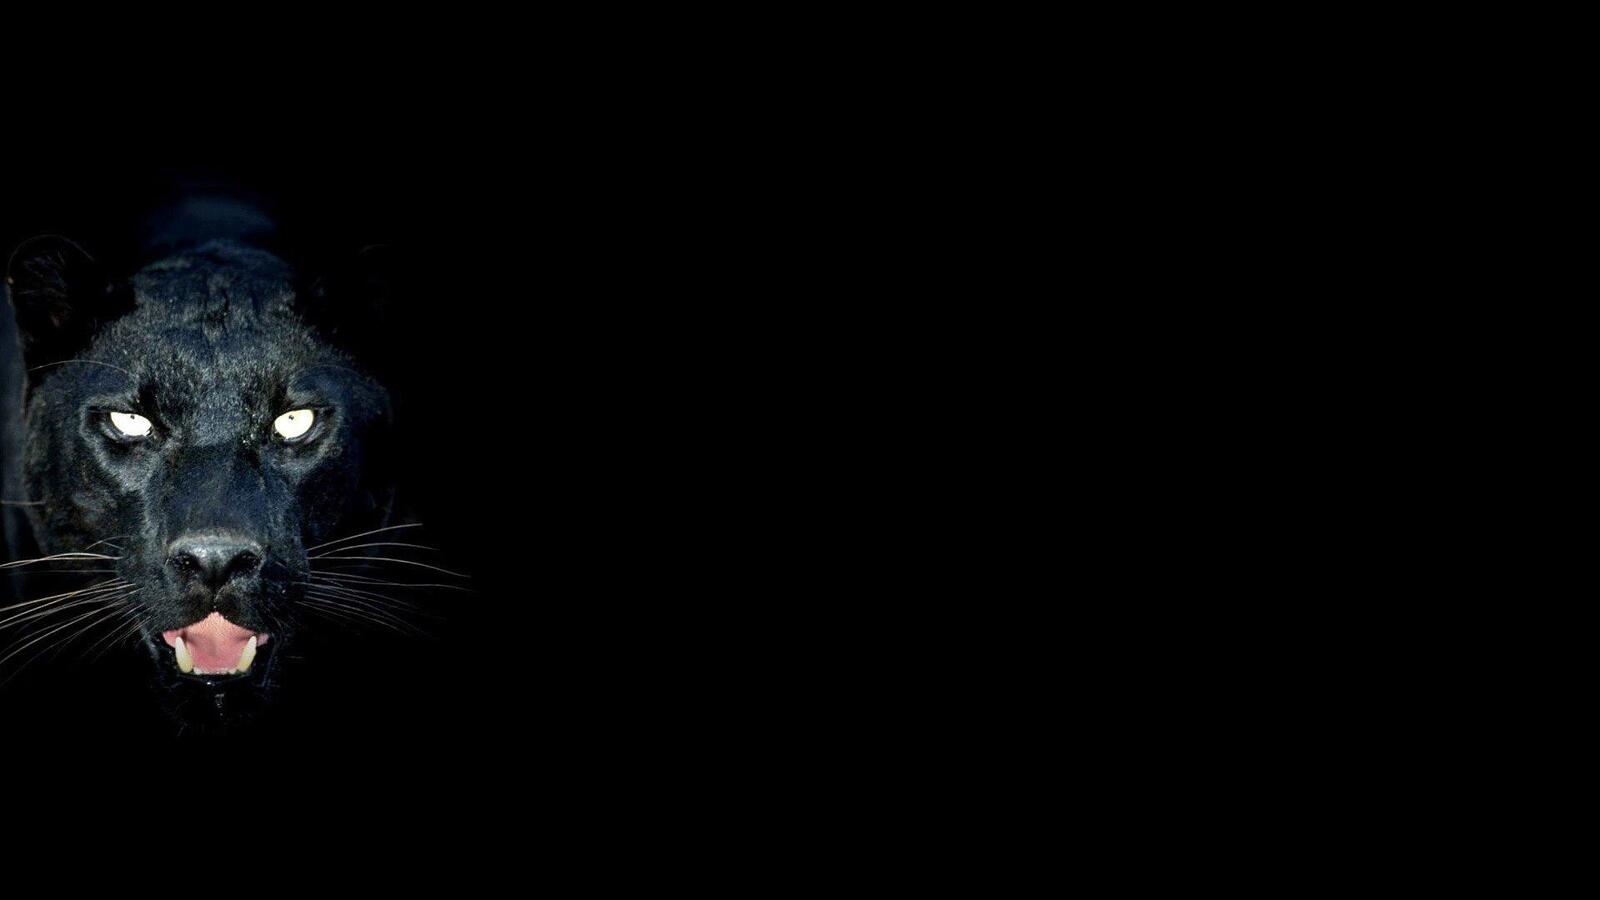 Free photo Black panther face on black background